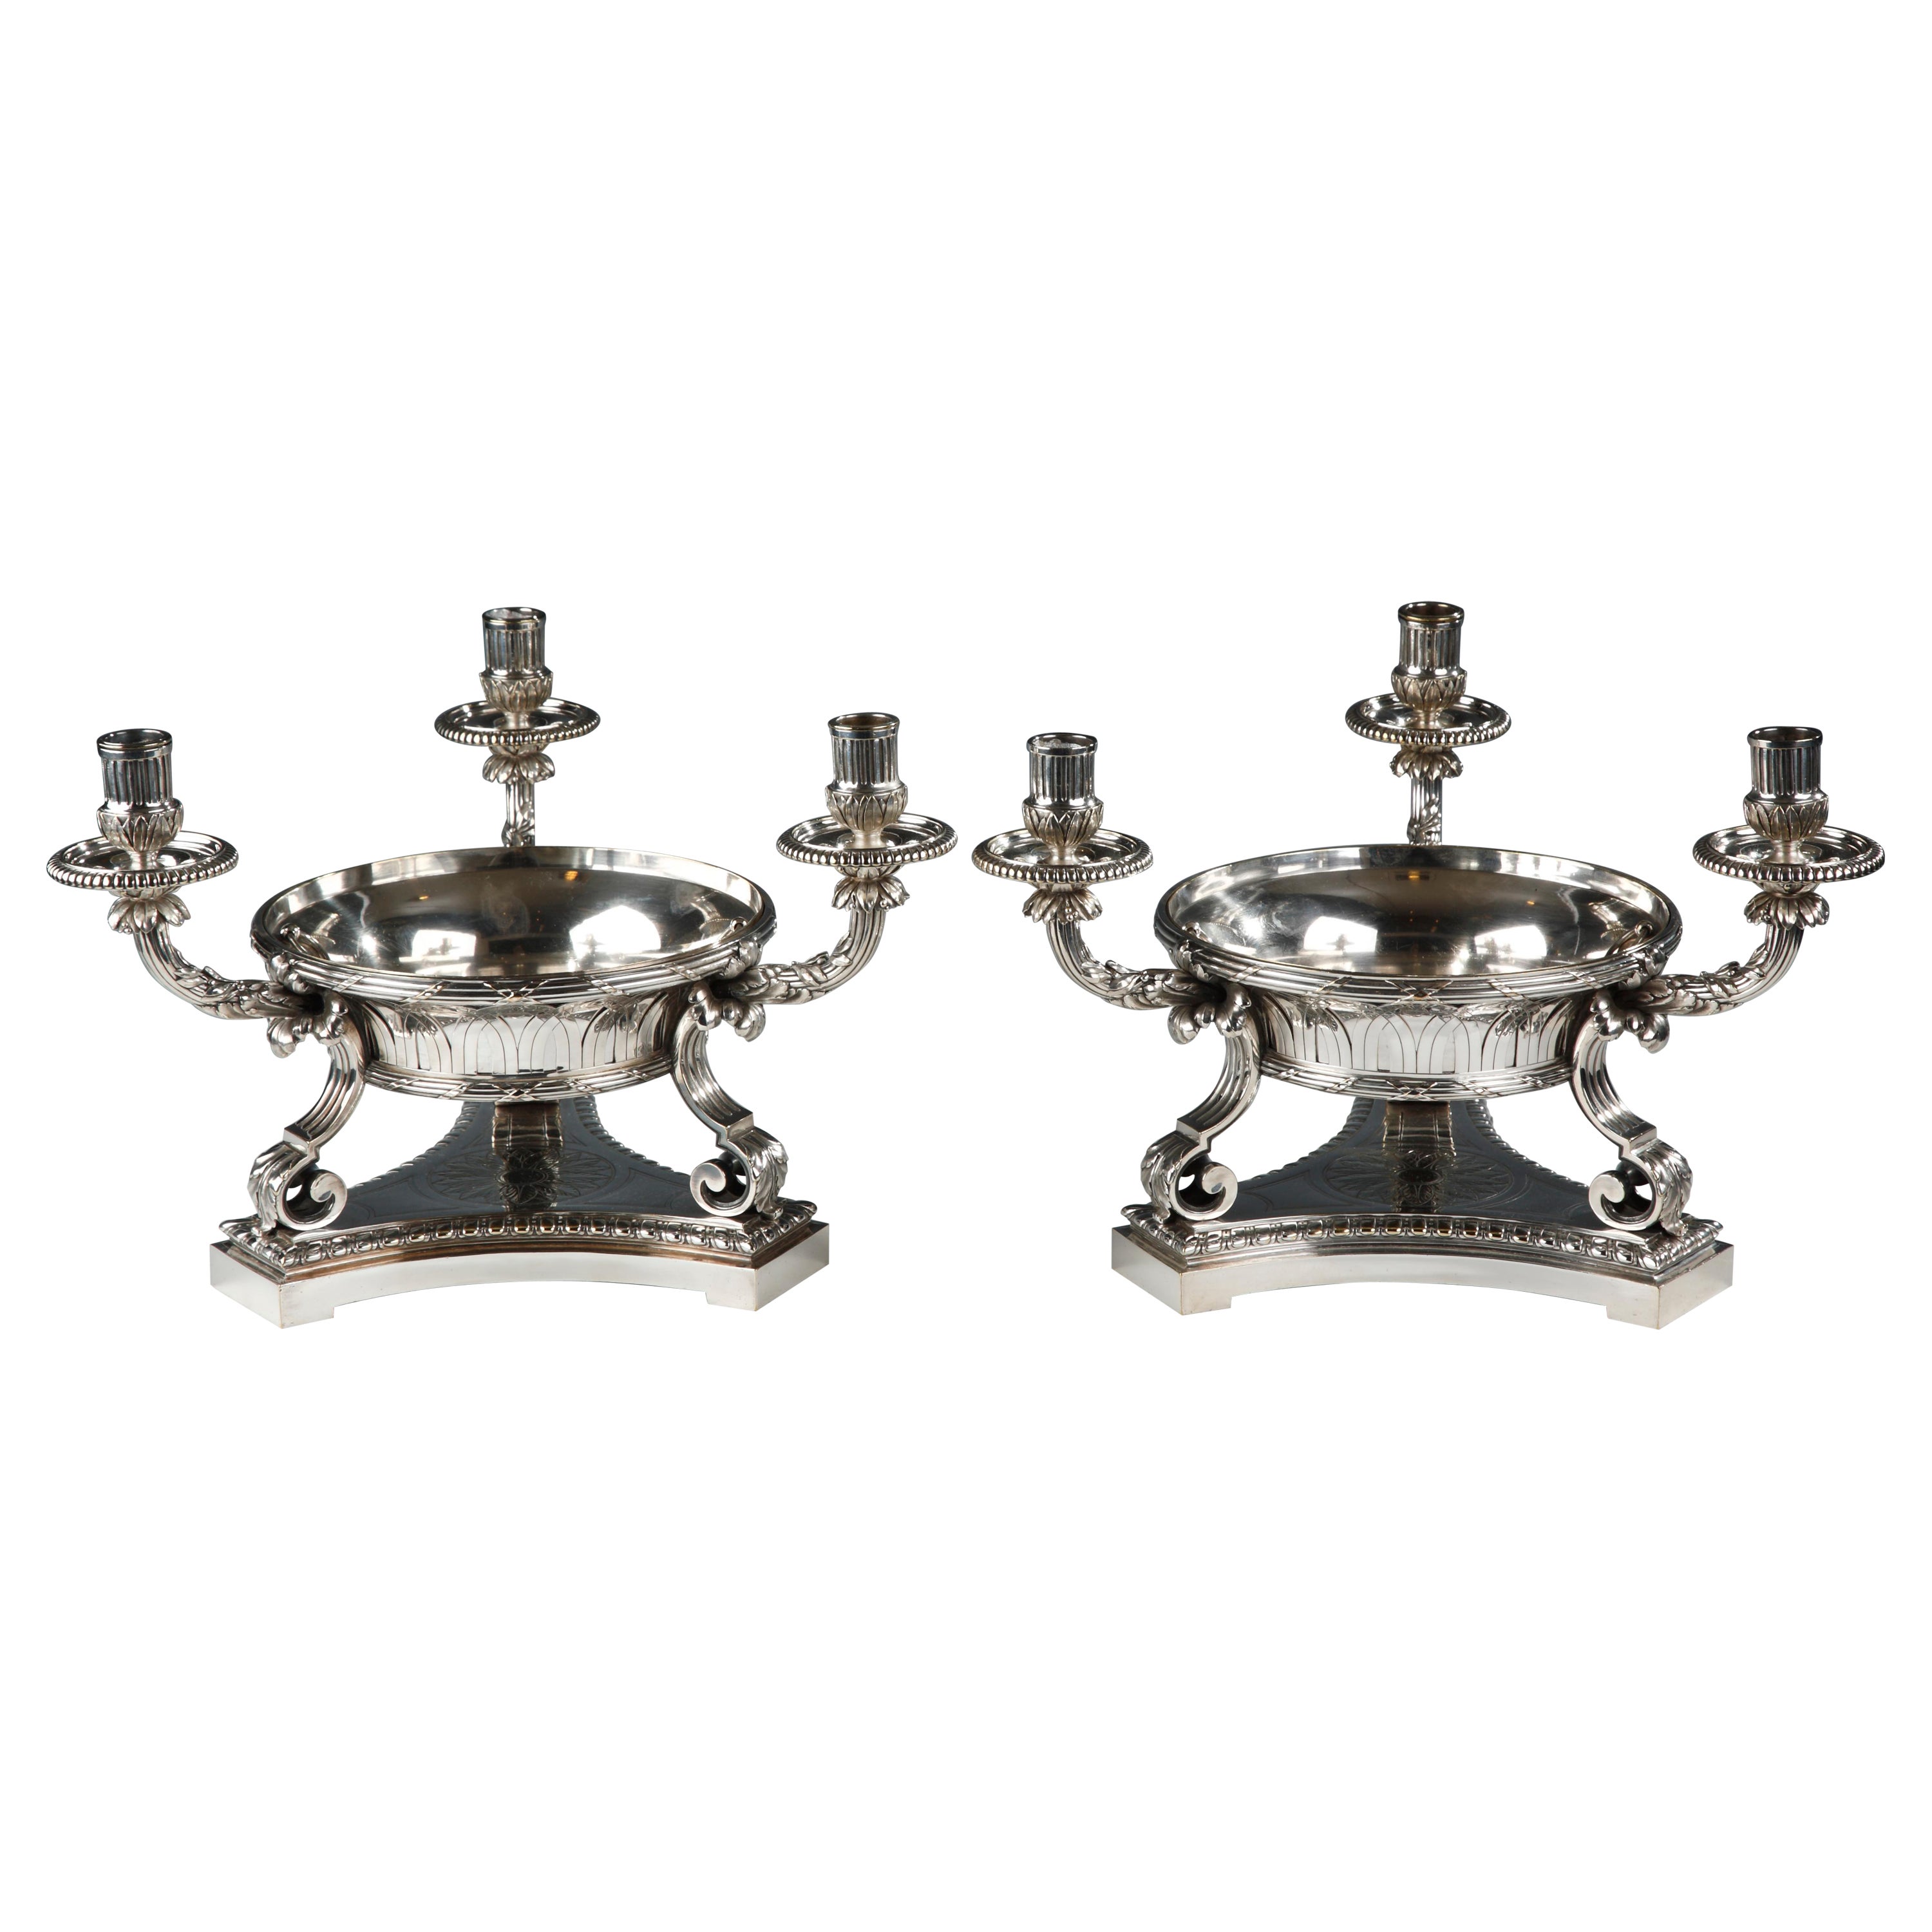 Pair of Jardinieres-Candelabras by Boin-Taburet, France, Circa 1880 For Sale